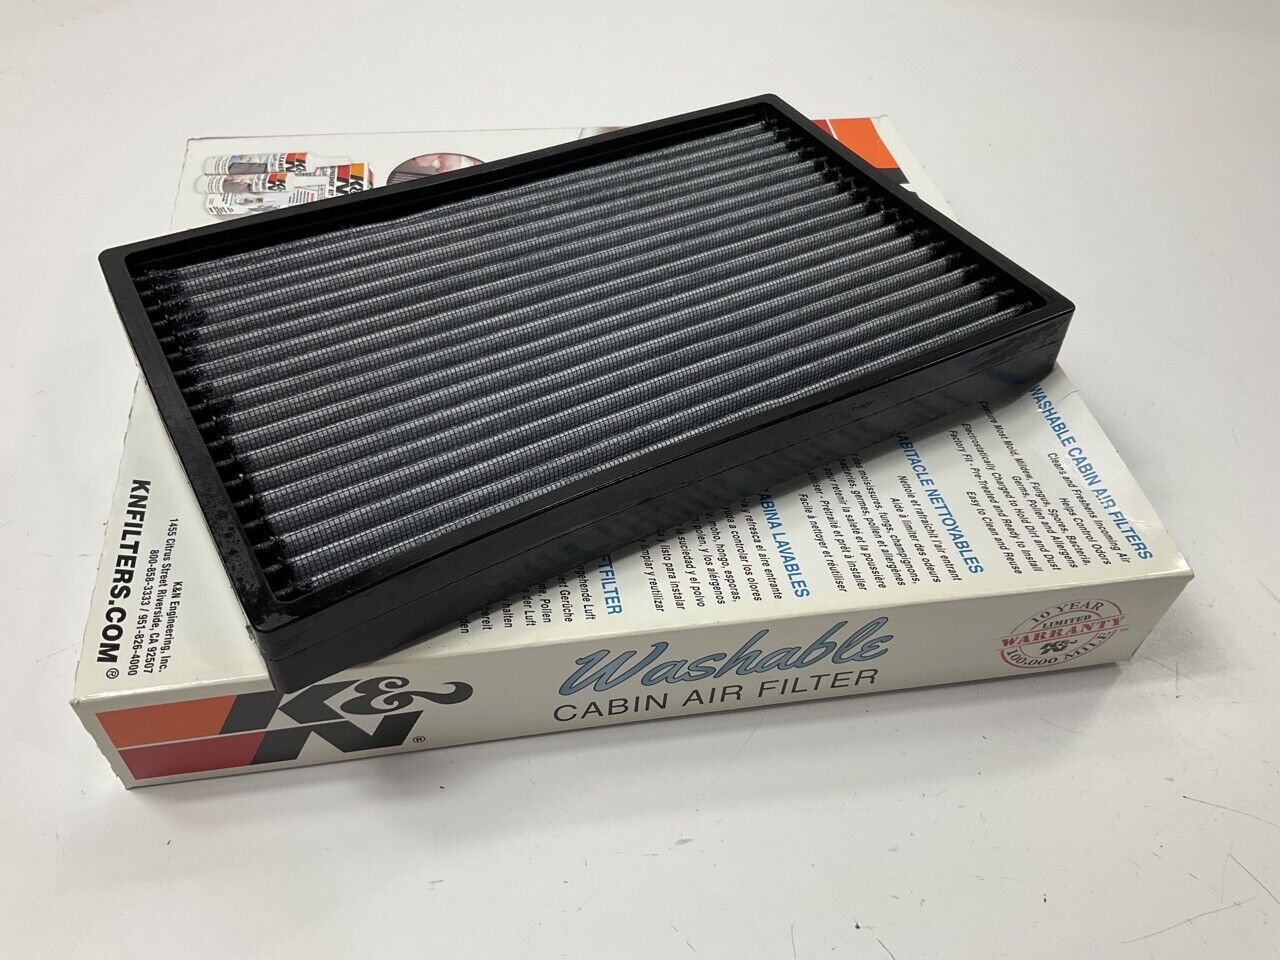 K&N VF3000 Washable Cabin Air Filter - 2000-2013 Chevy Impala, 97-07 Monte Carlo